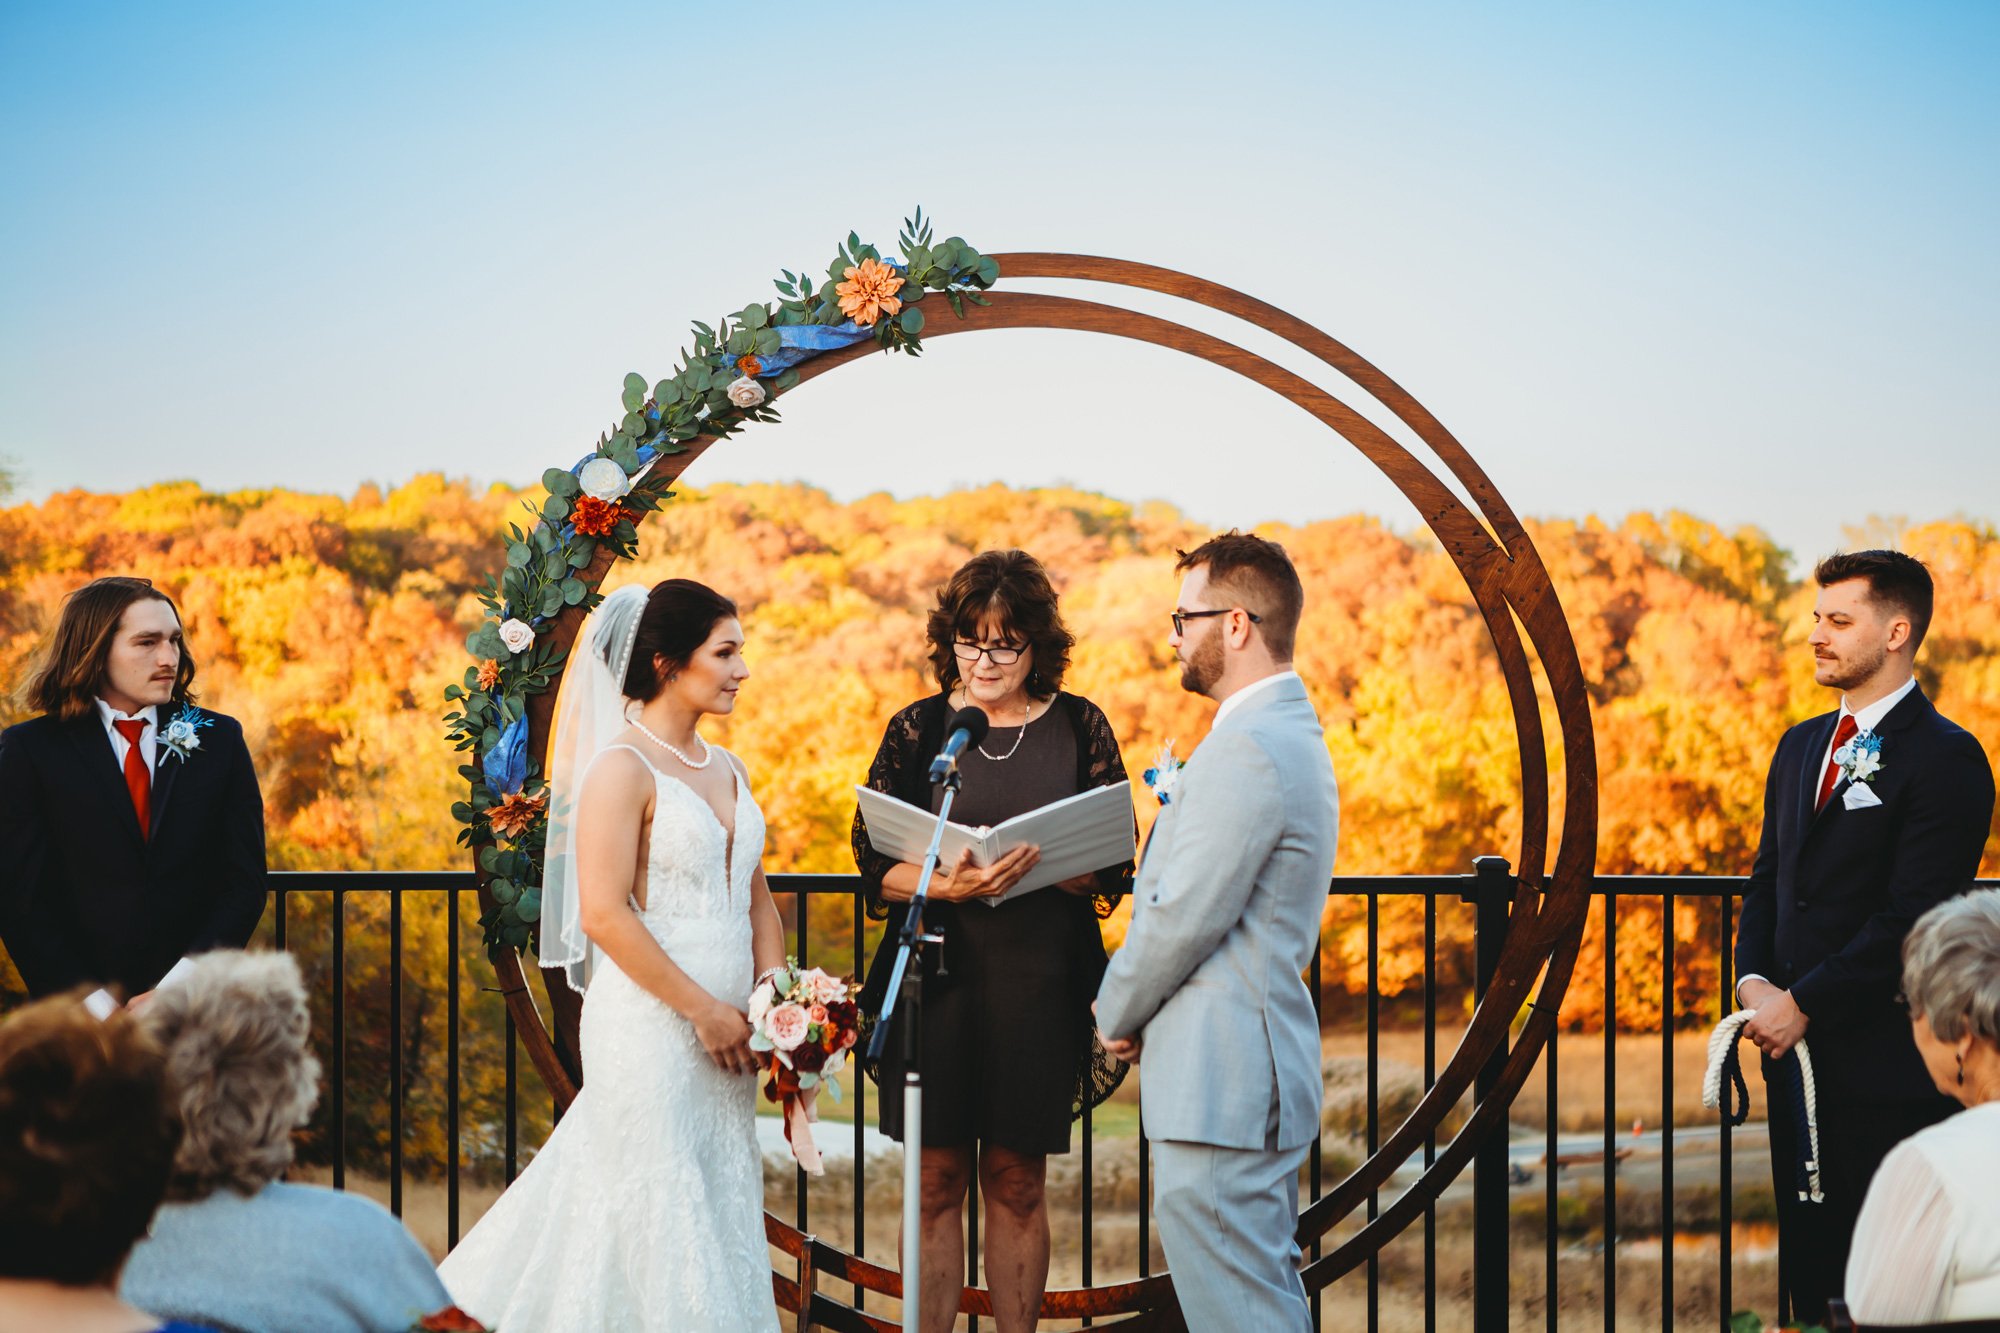  Beautiful fall wedding with colorful leaves behind the wedding altar by Teala Ward Photography. fall leaf weddings #TealaWardPhotography #TealaWardWeddings #WeddingLocationsIllinois #IllinoisWedding #weddingdetails #weddingphotography #married 